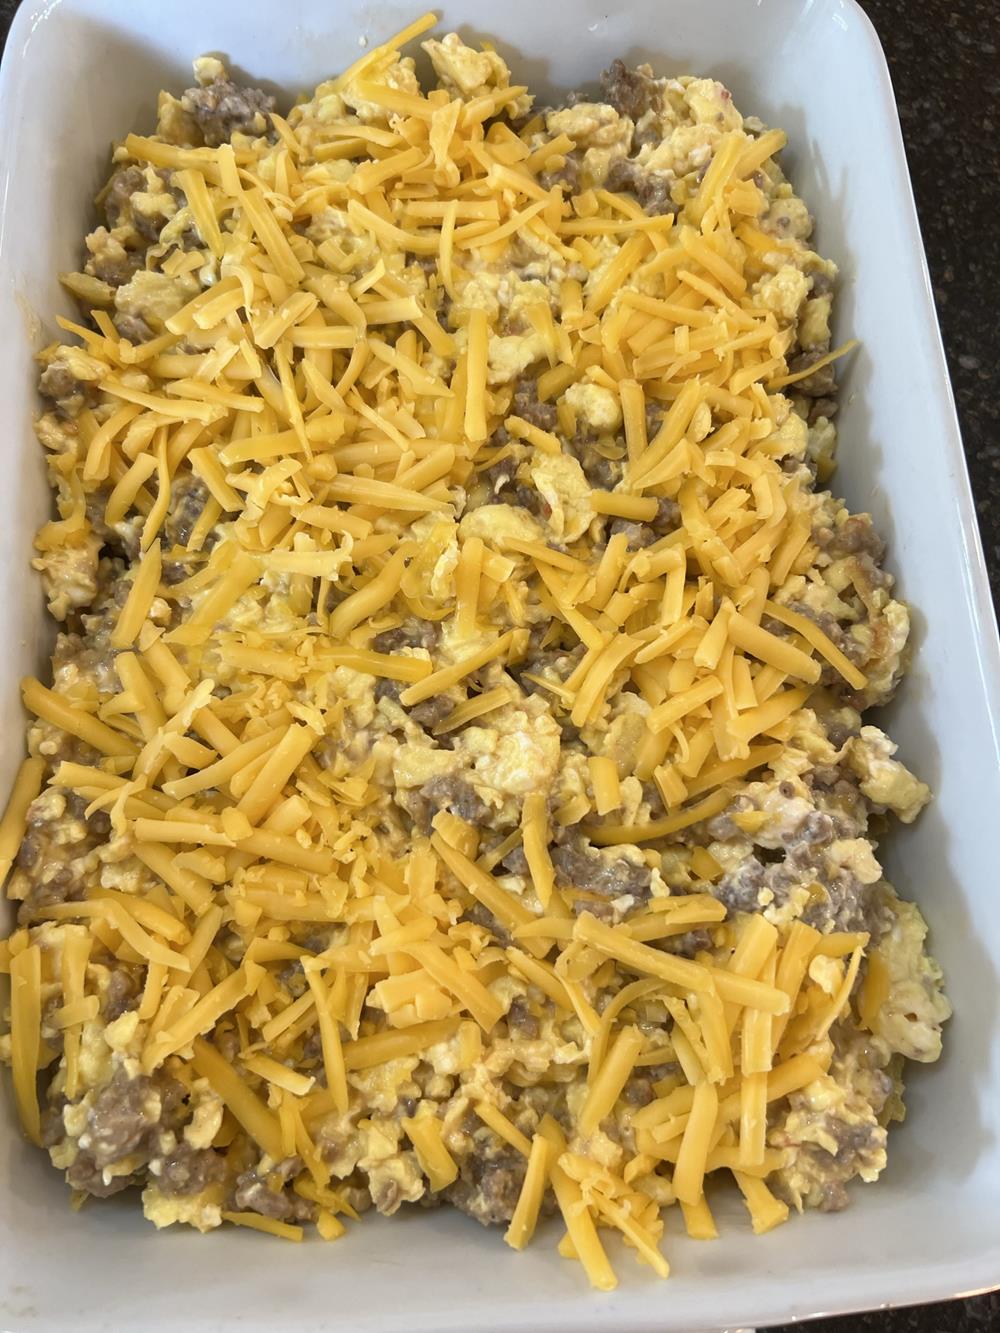 unbaked Mexican breakfast casserole in white baking dish